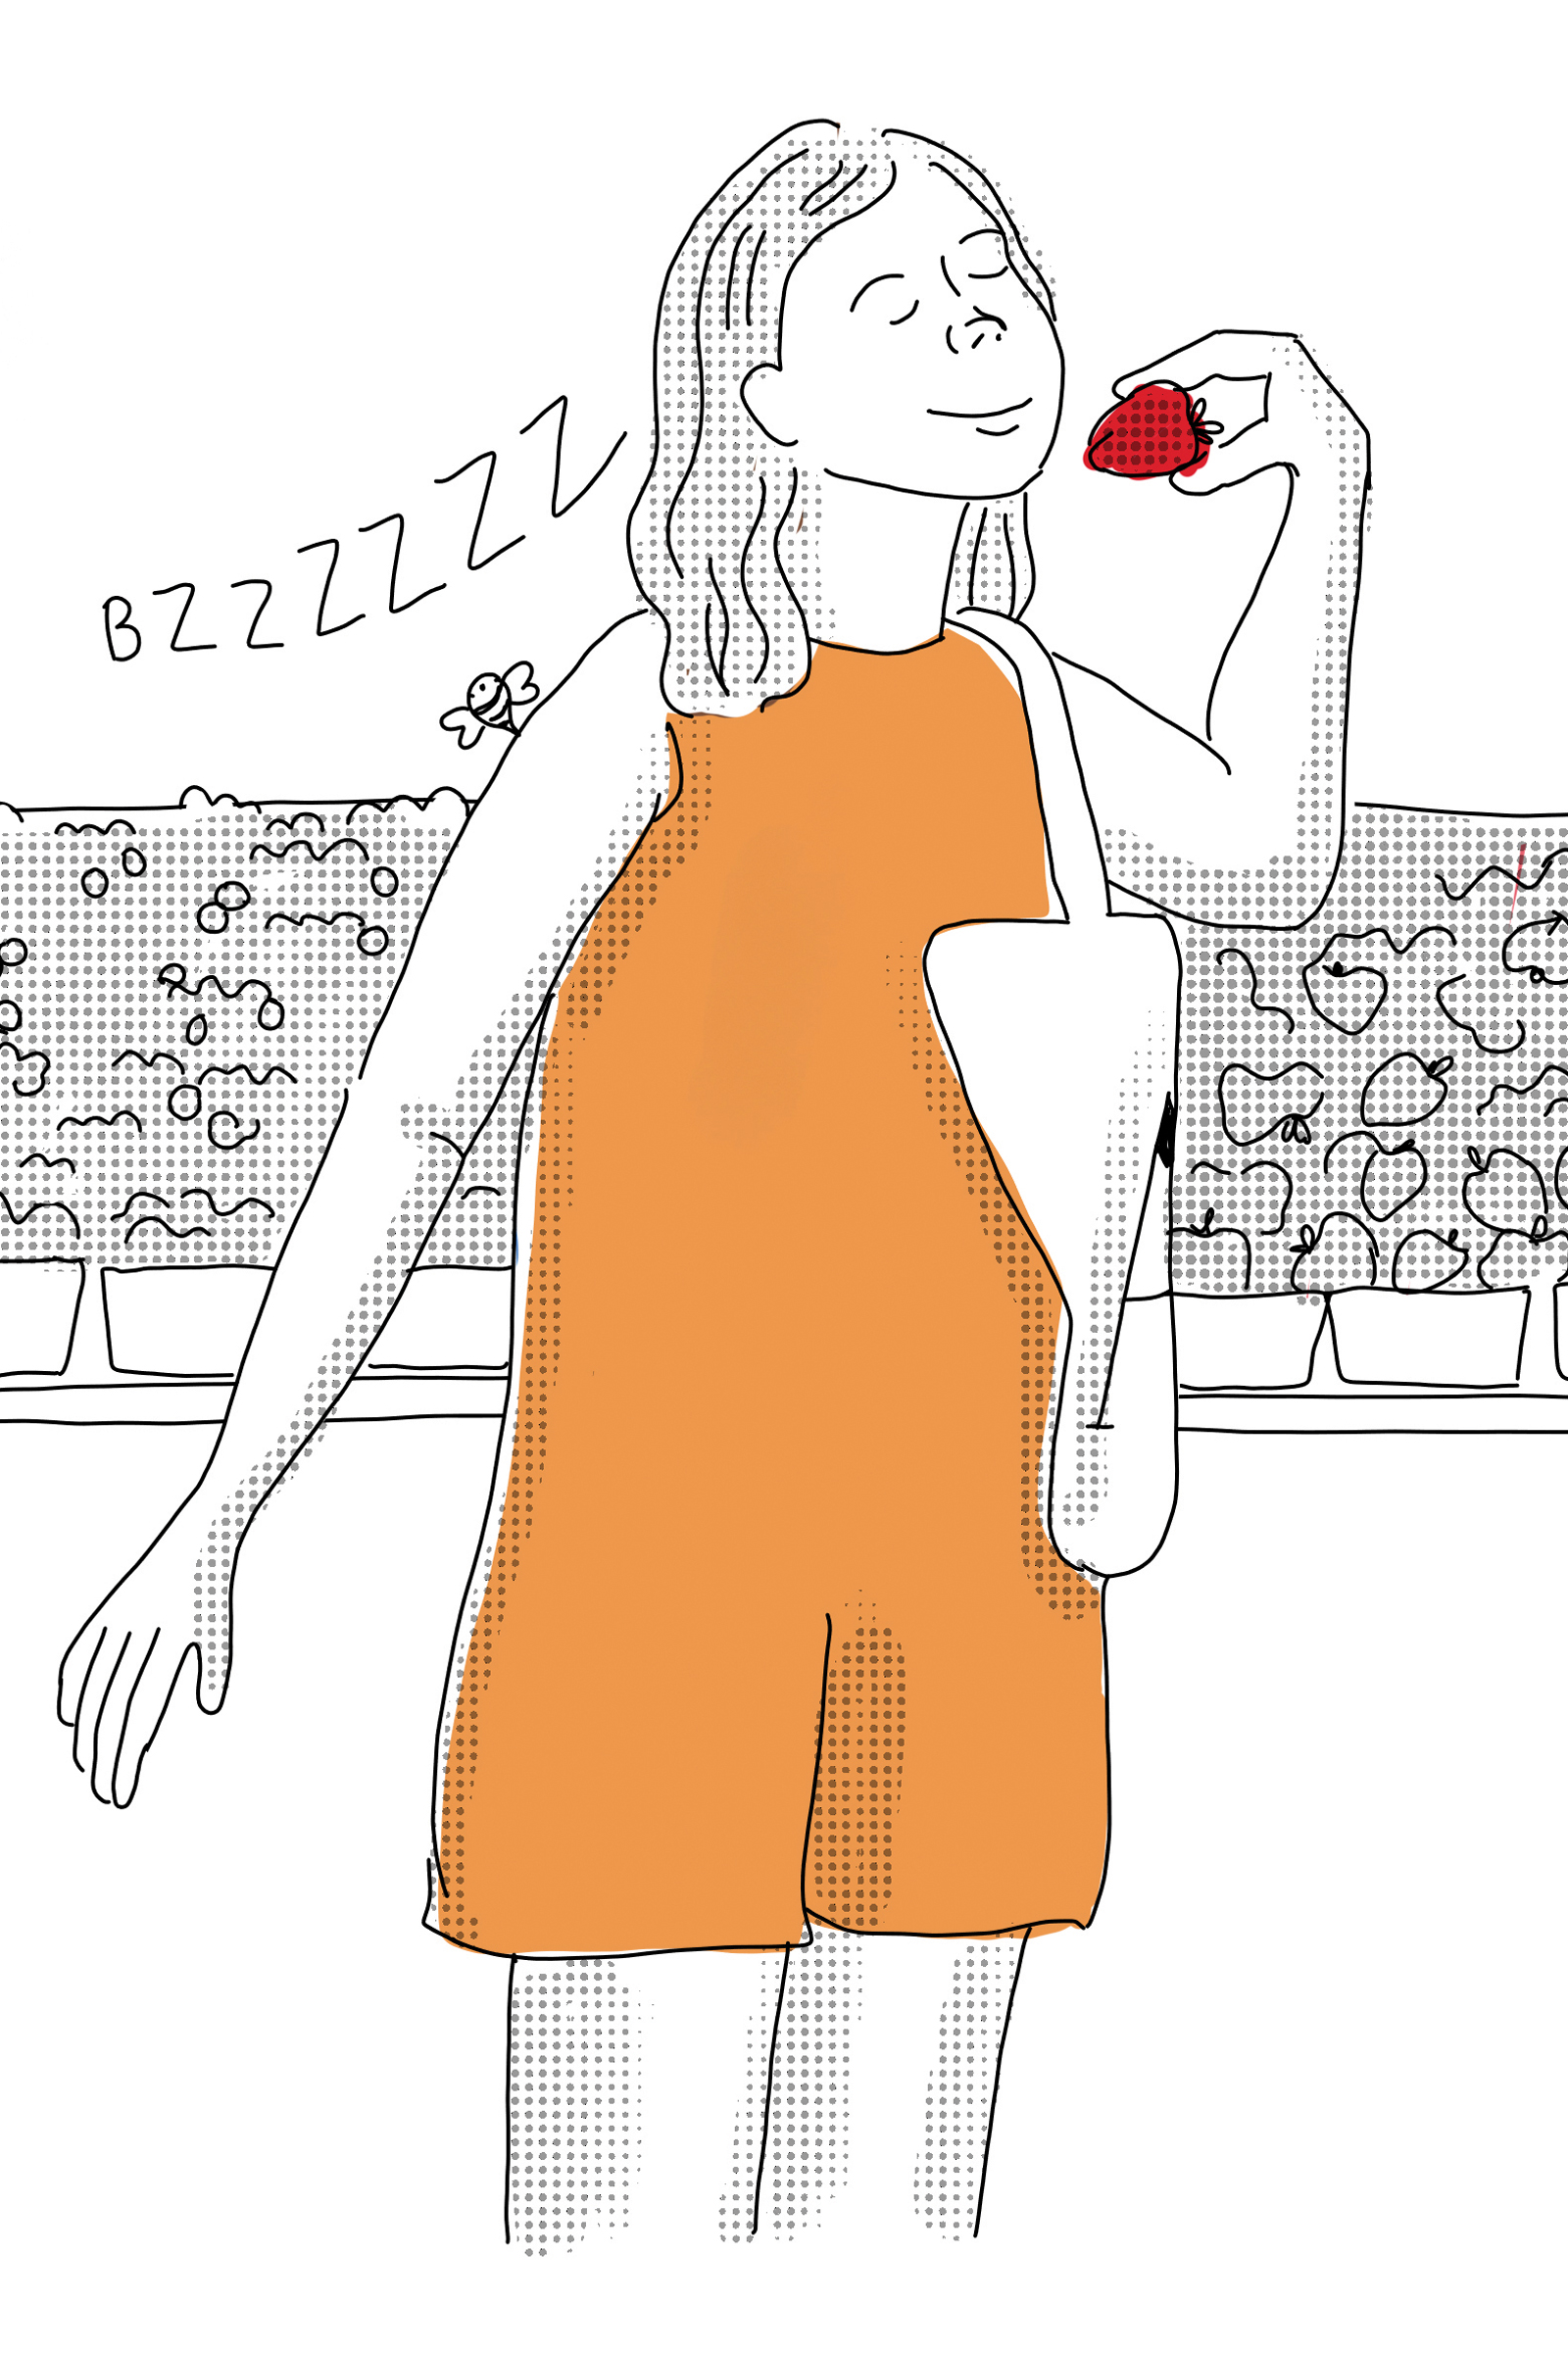 Illustration of woman sniffing a berry at a farmer's market